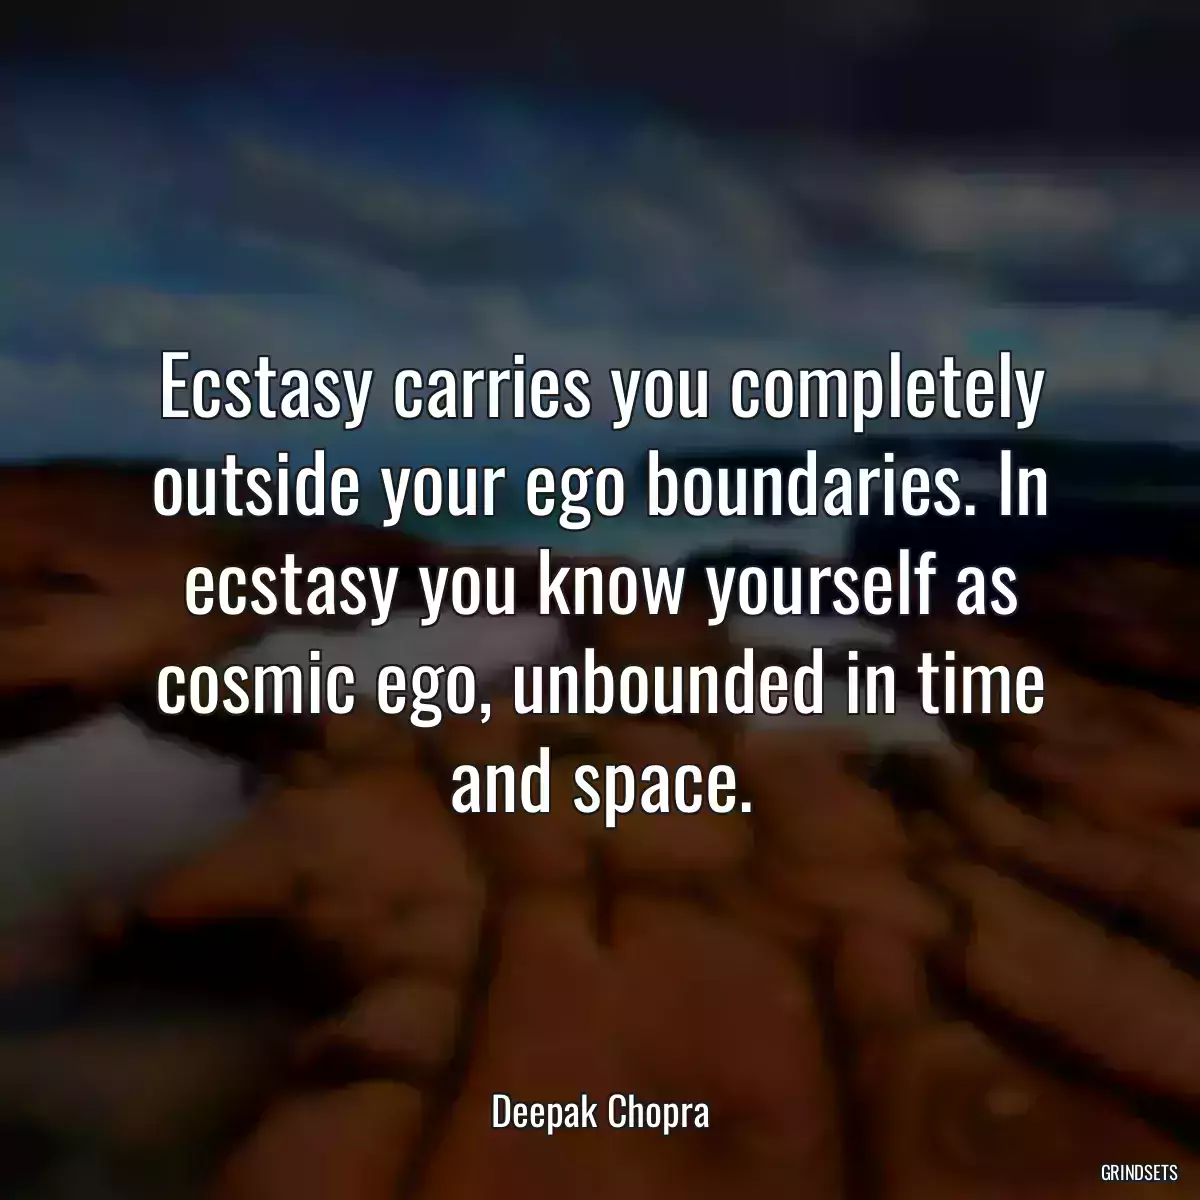 Ecstasy carries you completely outside your ego boundaries. In ecstasy you know yourself as cosmic ego, unbounded in time and space.